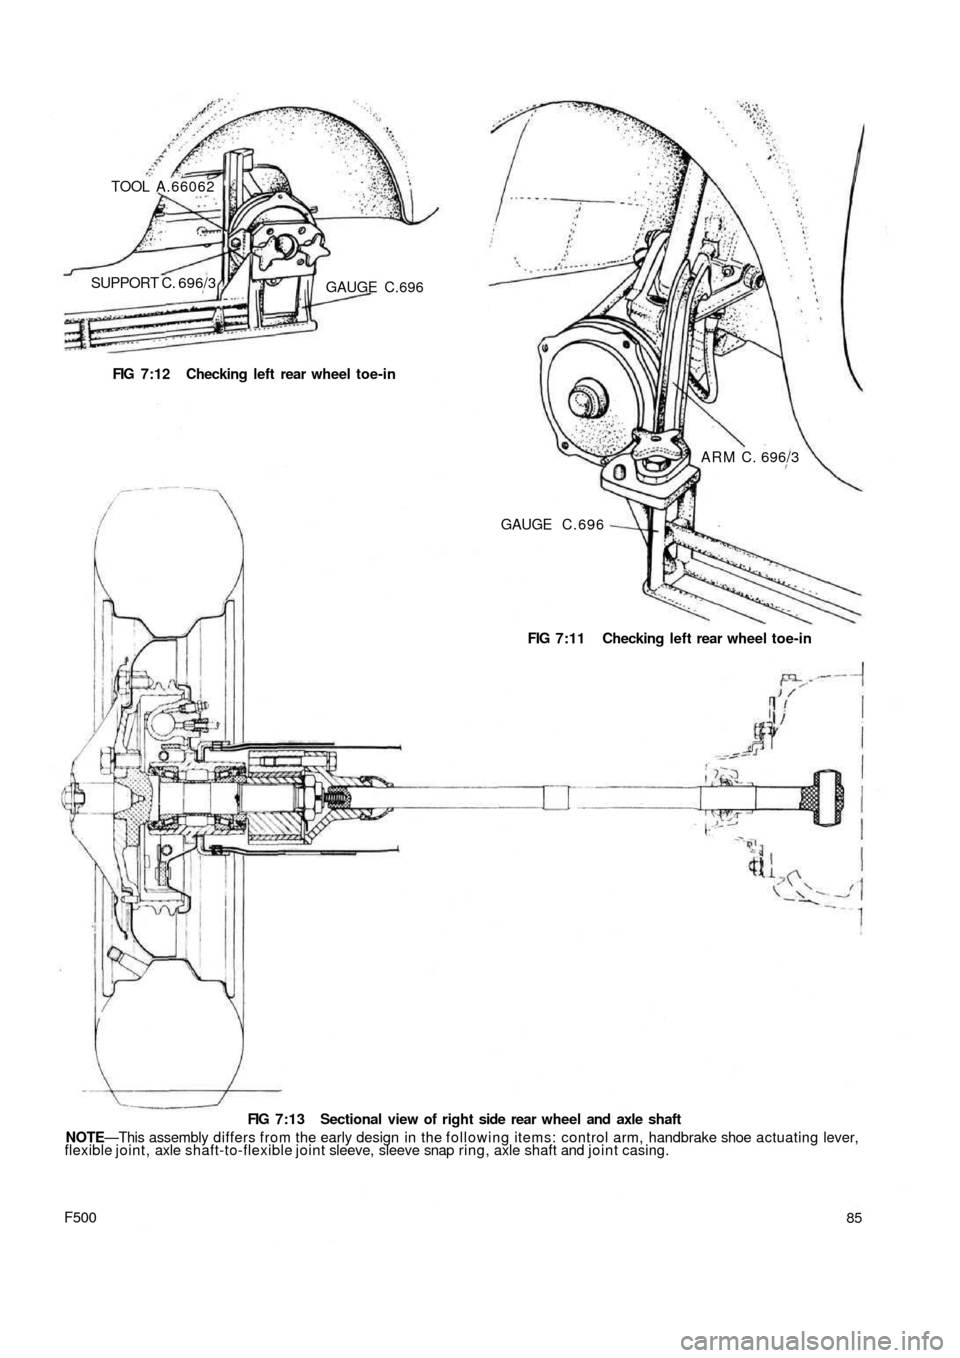 FIAT 500 1968 1.G Workshop Manual TOOL A.66062
SUPPORT C. 696/3GAUGE C.696
FIG 7:12 Checking left rear wheel toe-in
ARM C. 696/3
GAUGE C . 6 9 6
FIG 7:11 Checking left rear wheel toe-in
F500
FIG 7:13 Sectional view of right side rear 